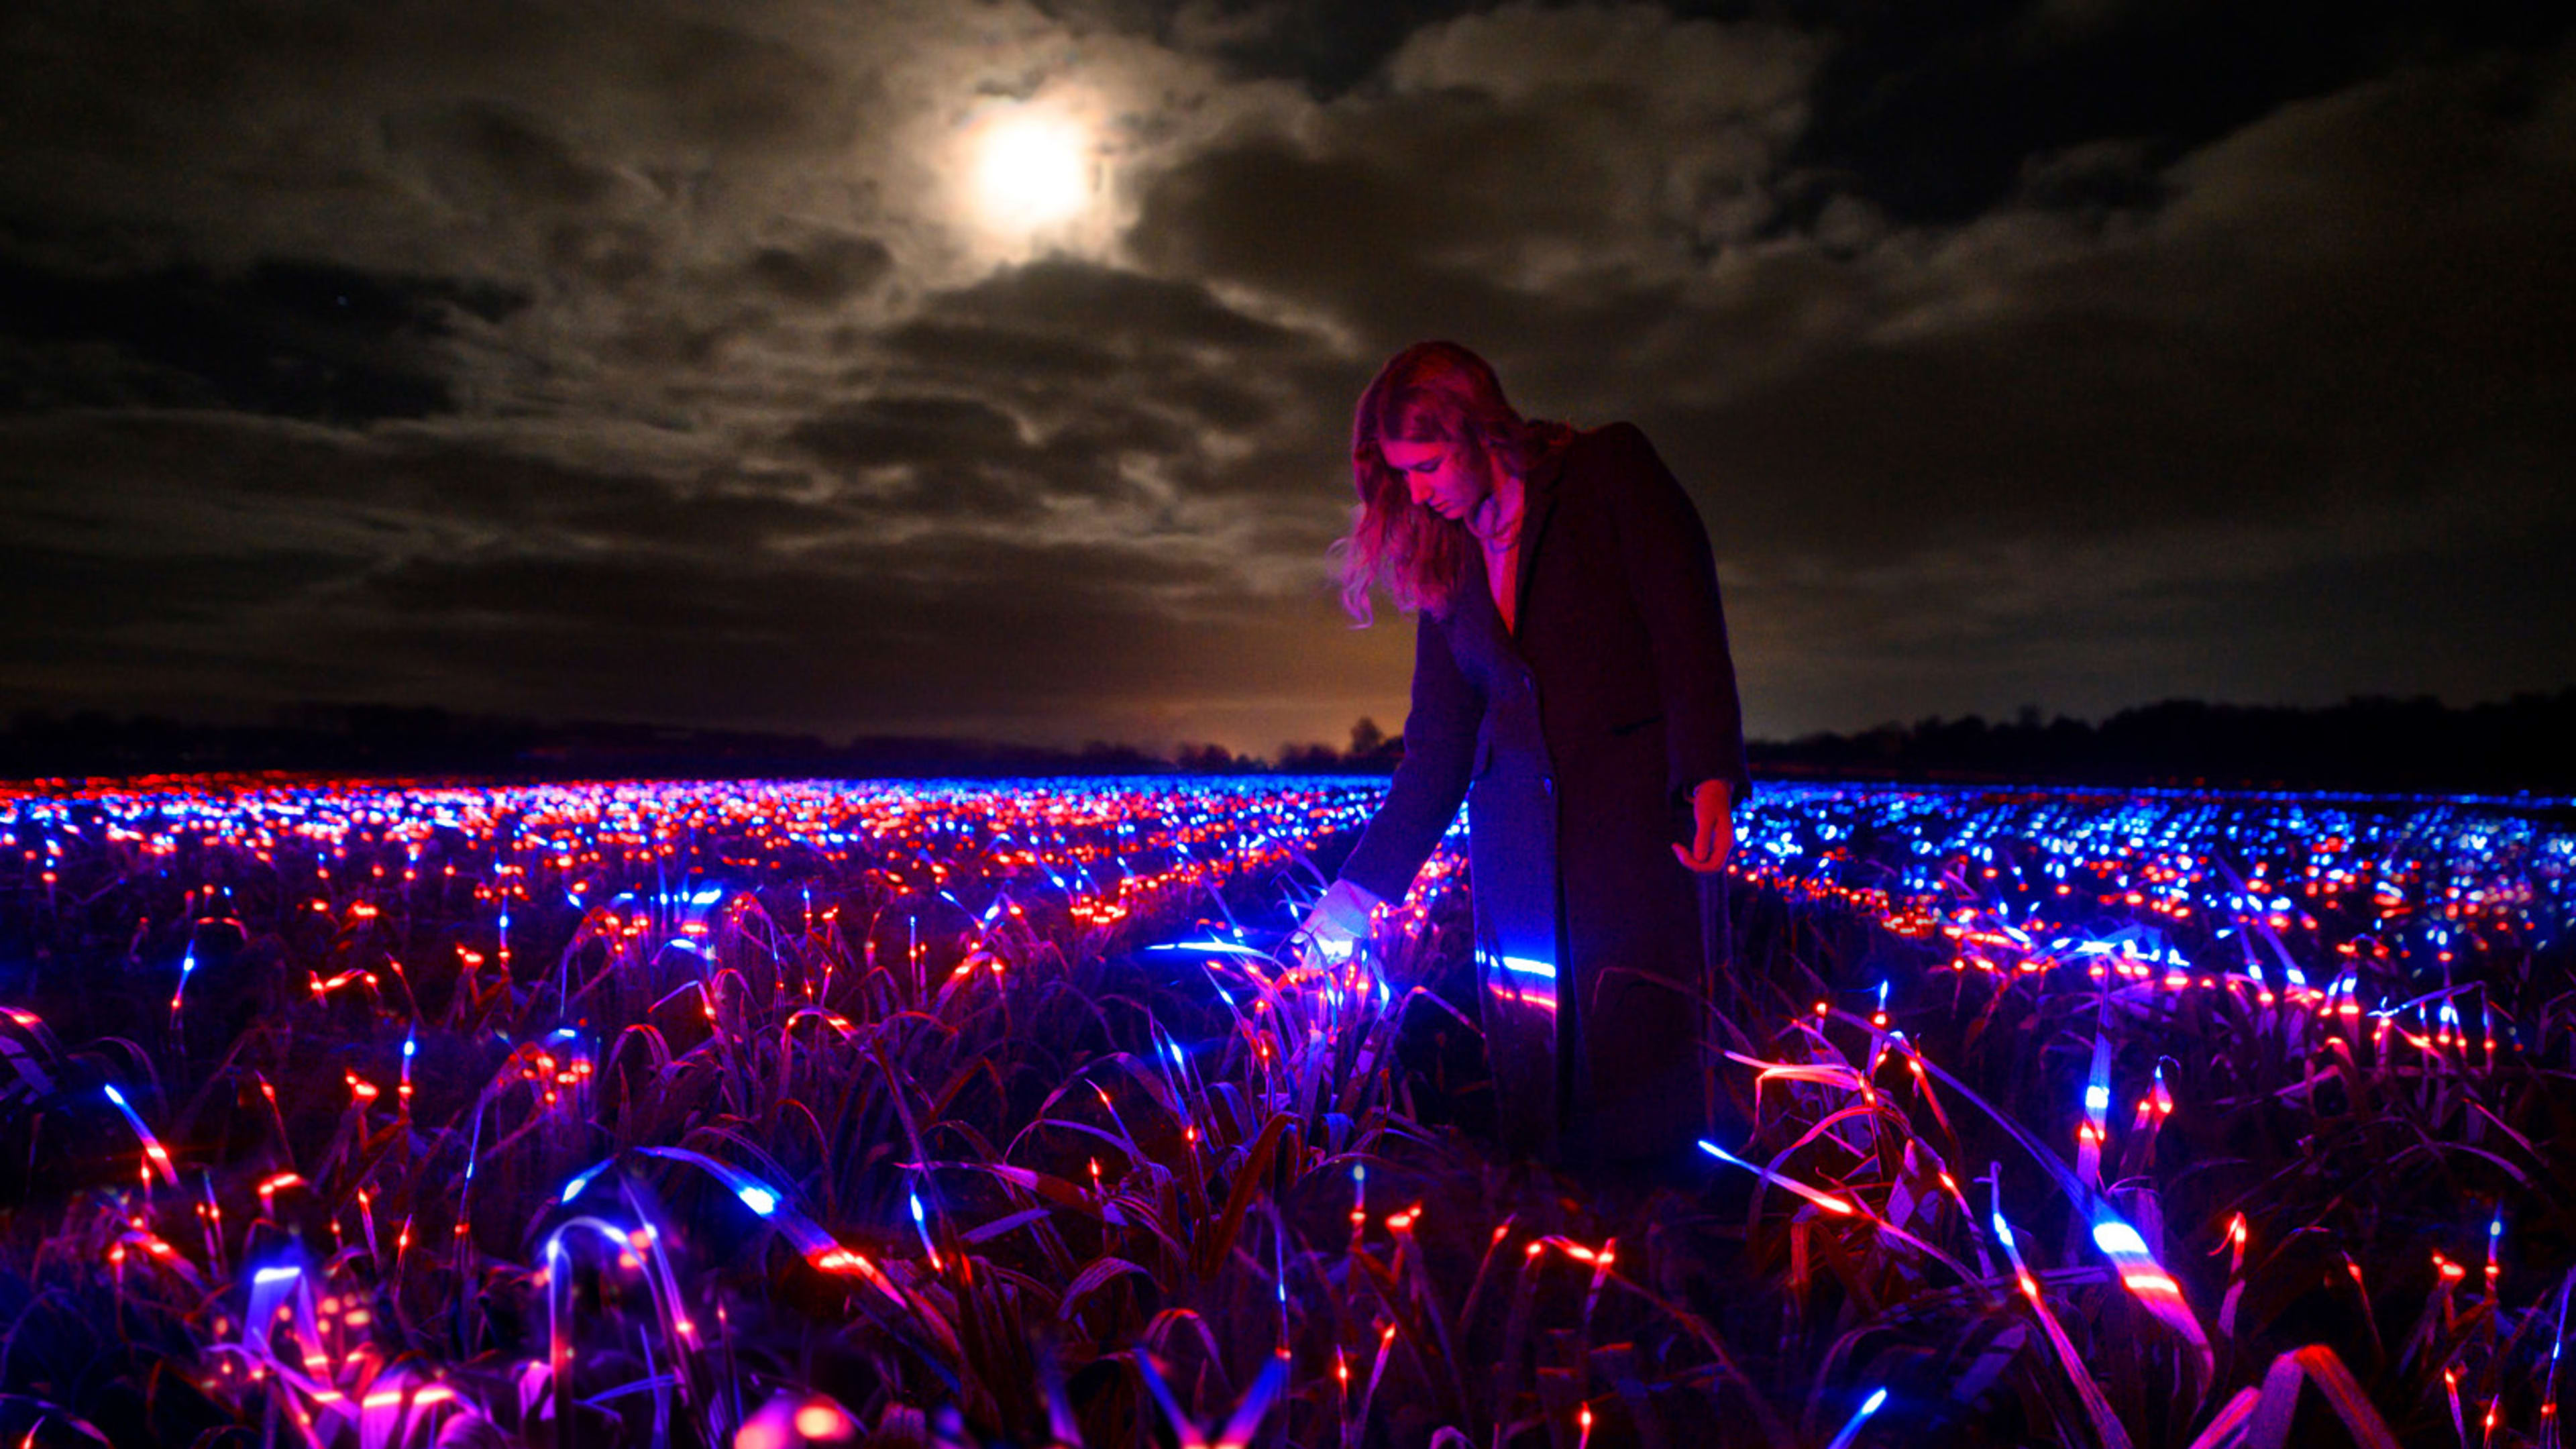 This stunning light display could make crops more sustainable